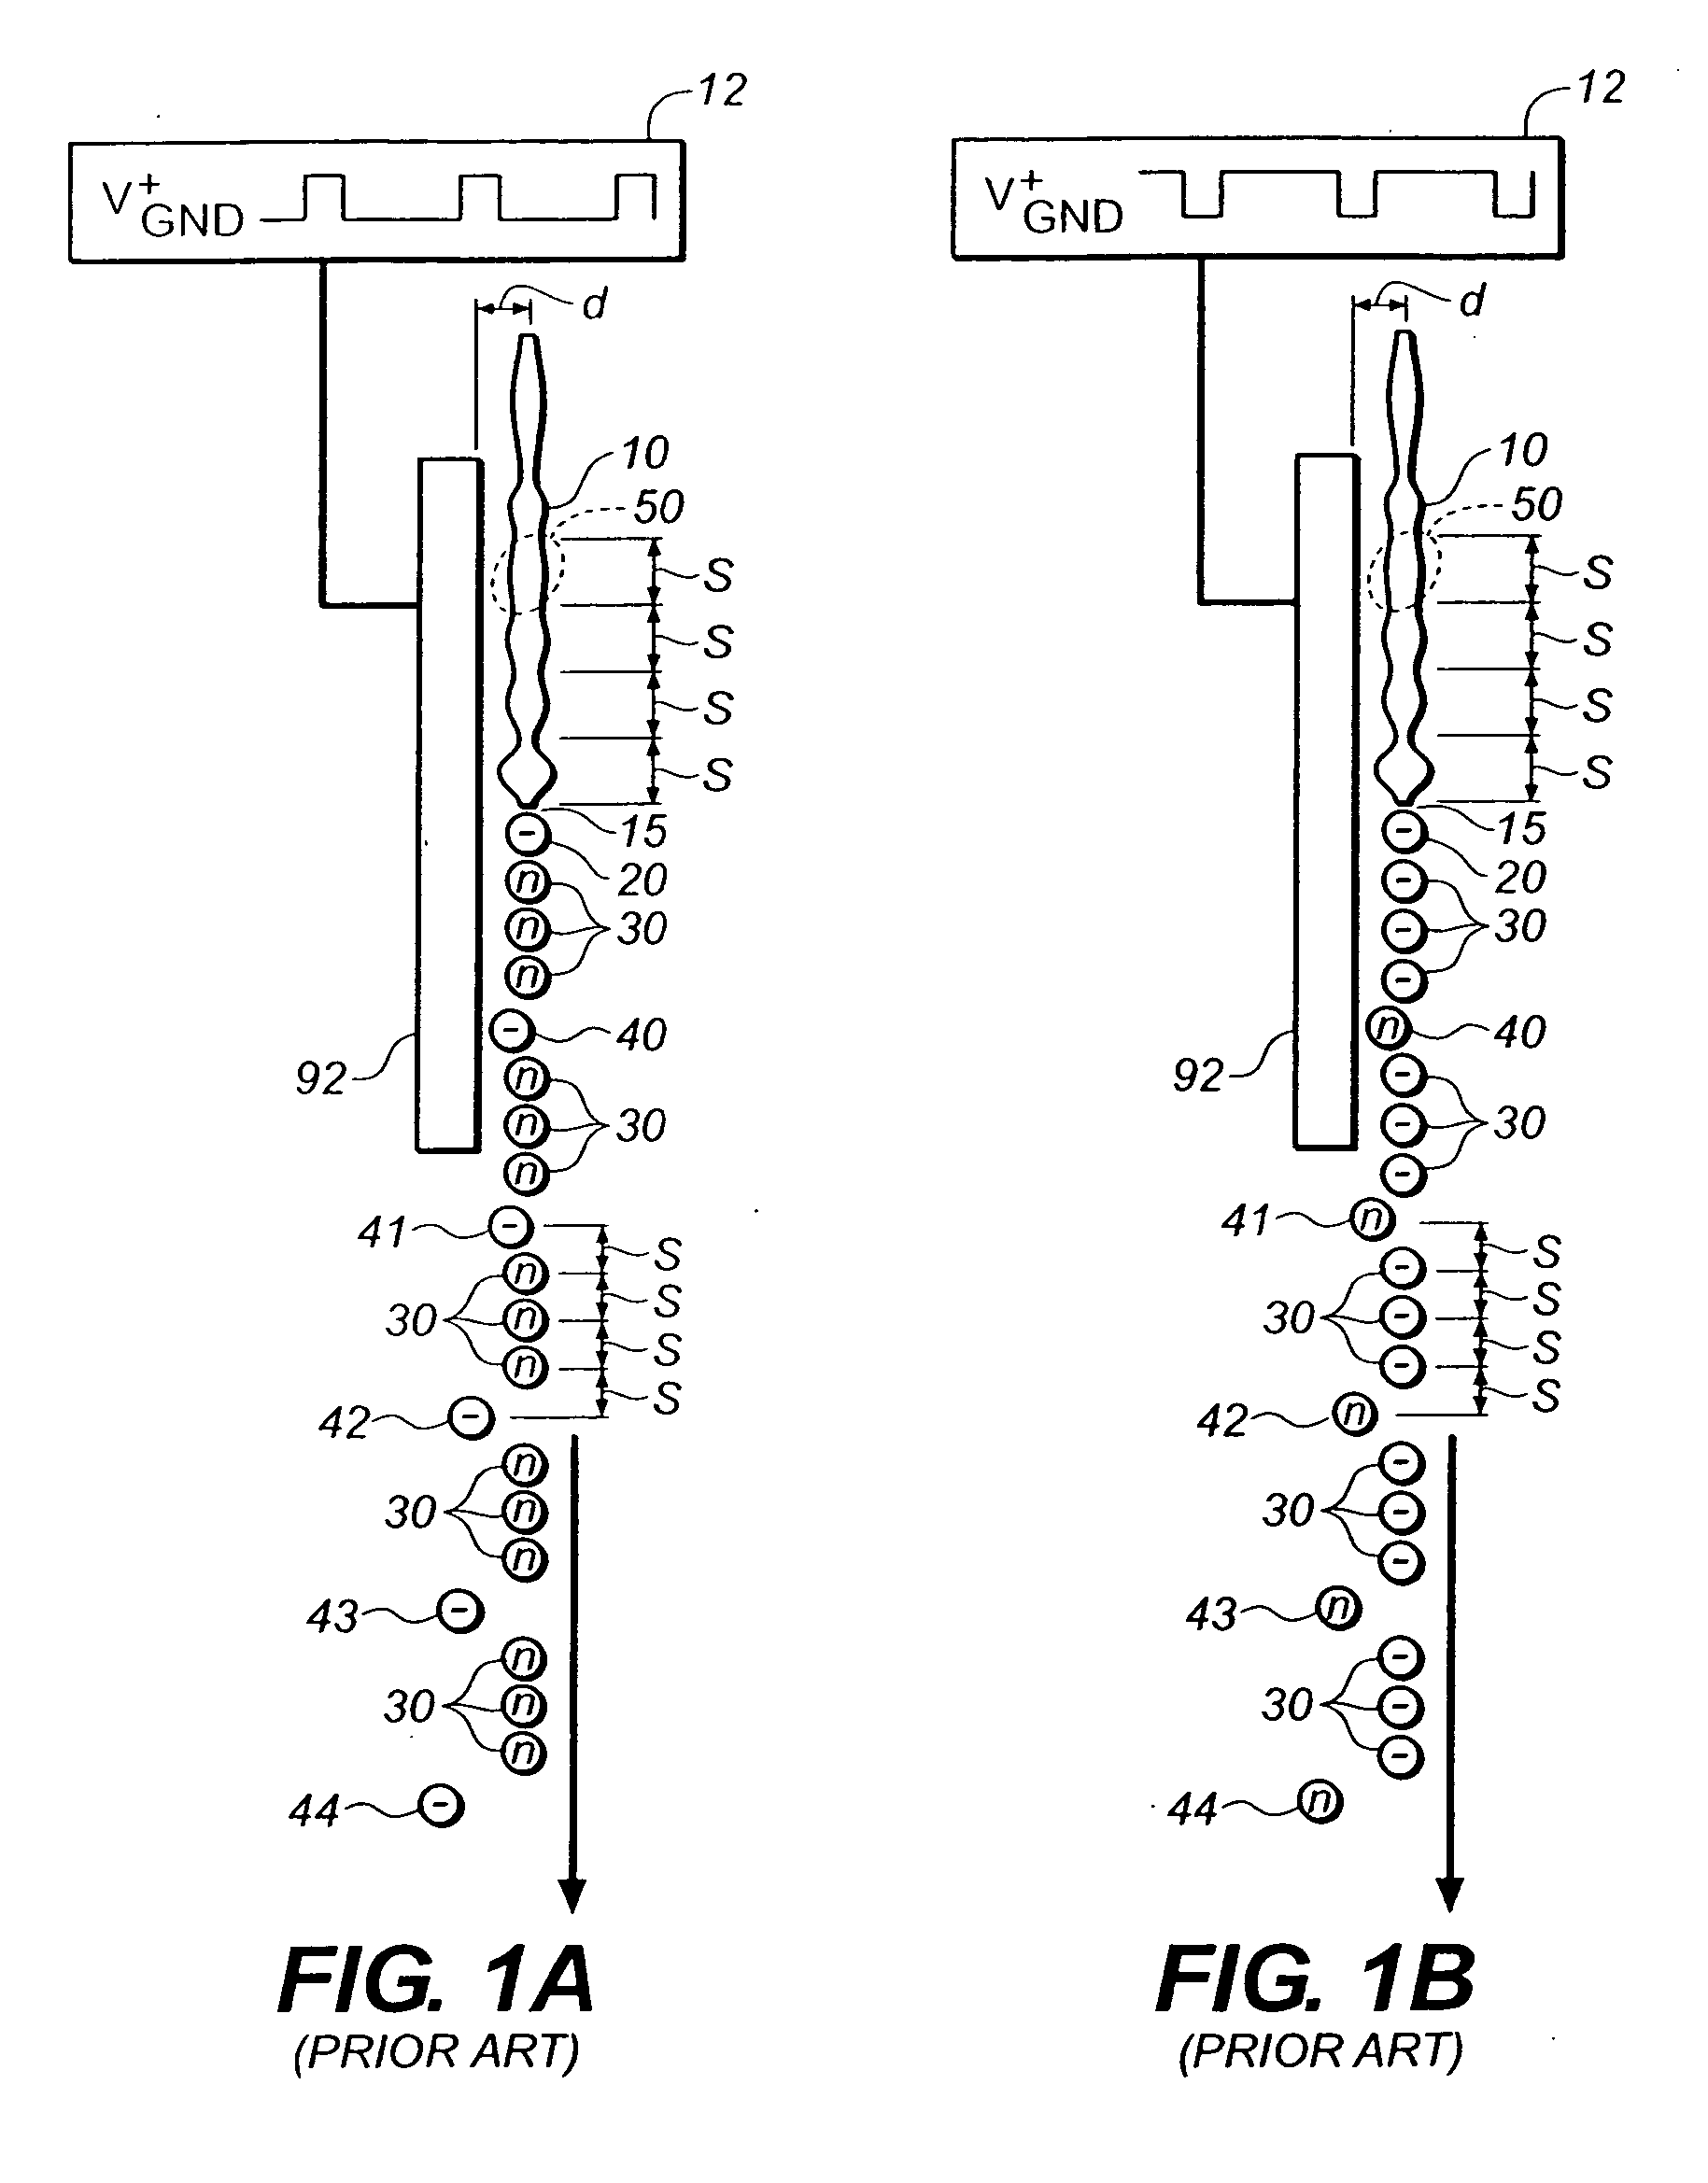 Method and apparatus for forming and charging fluid droplets